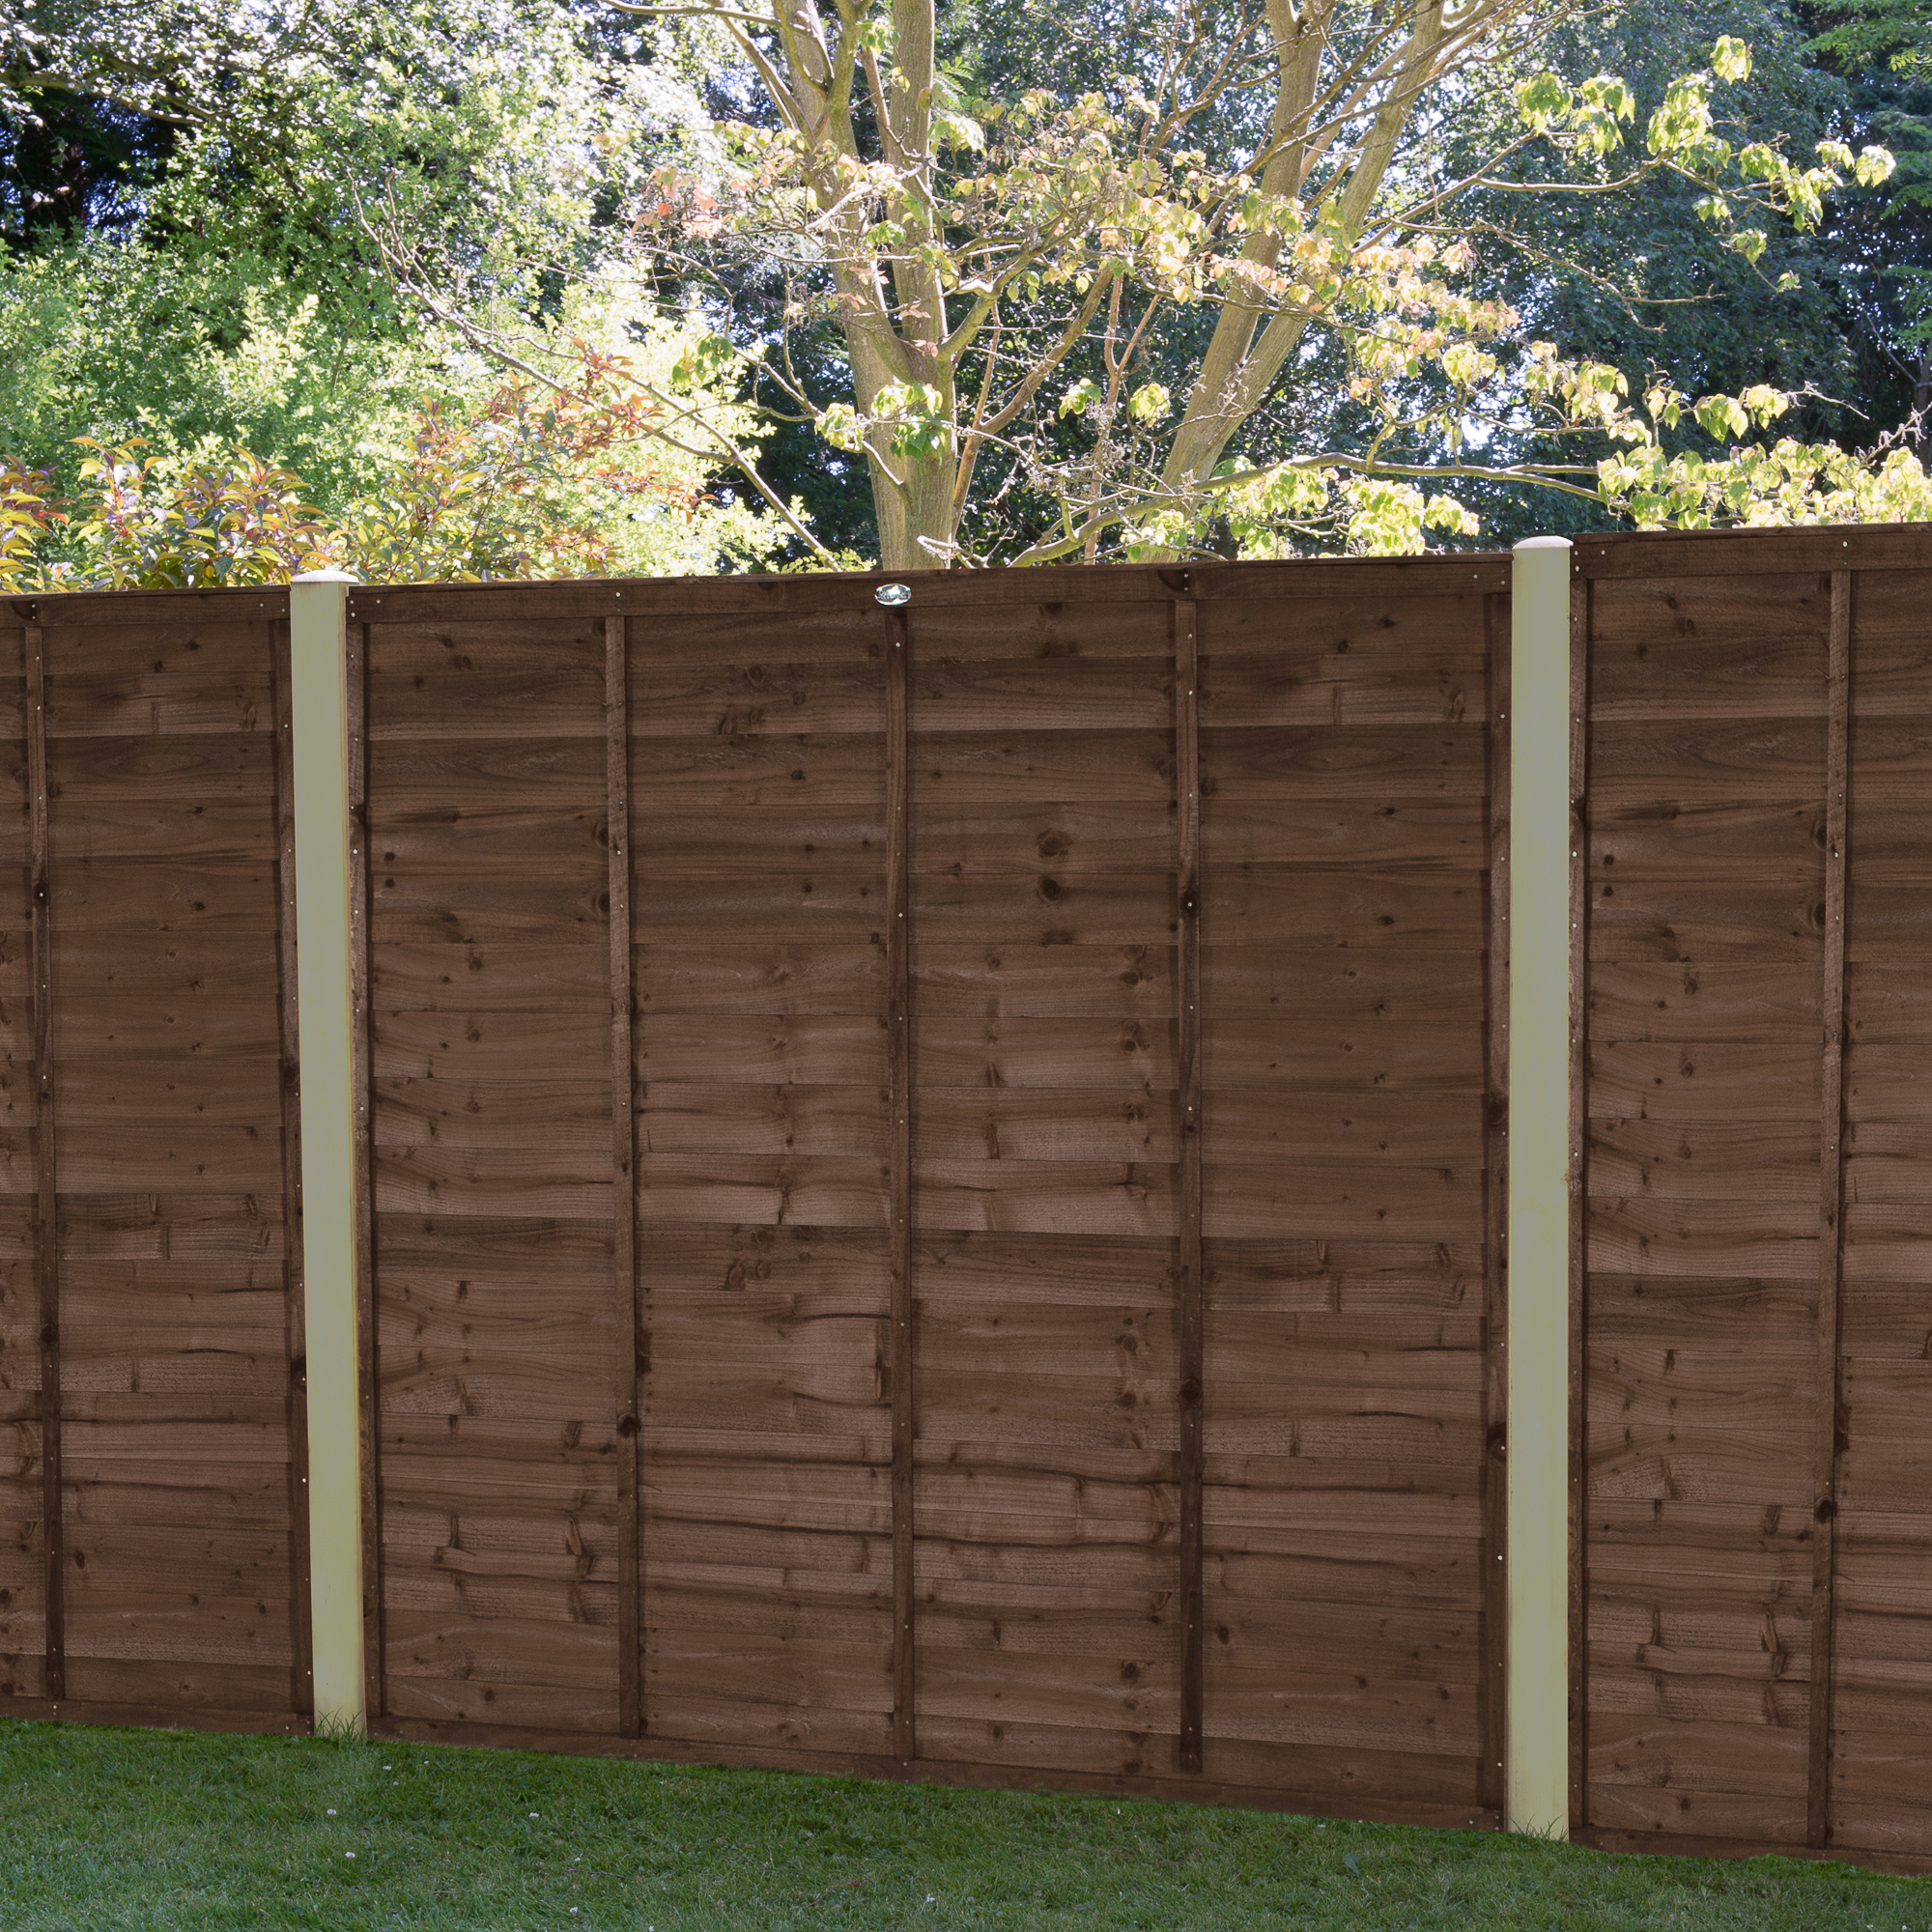 Image of Forest Garden Brown Pressure Treated Superlap Fence Panel - 1830 x 1680mm - 6 x 5'6ft - Pack of 4